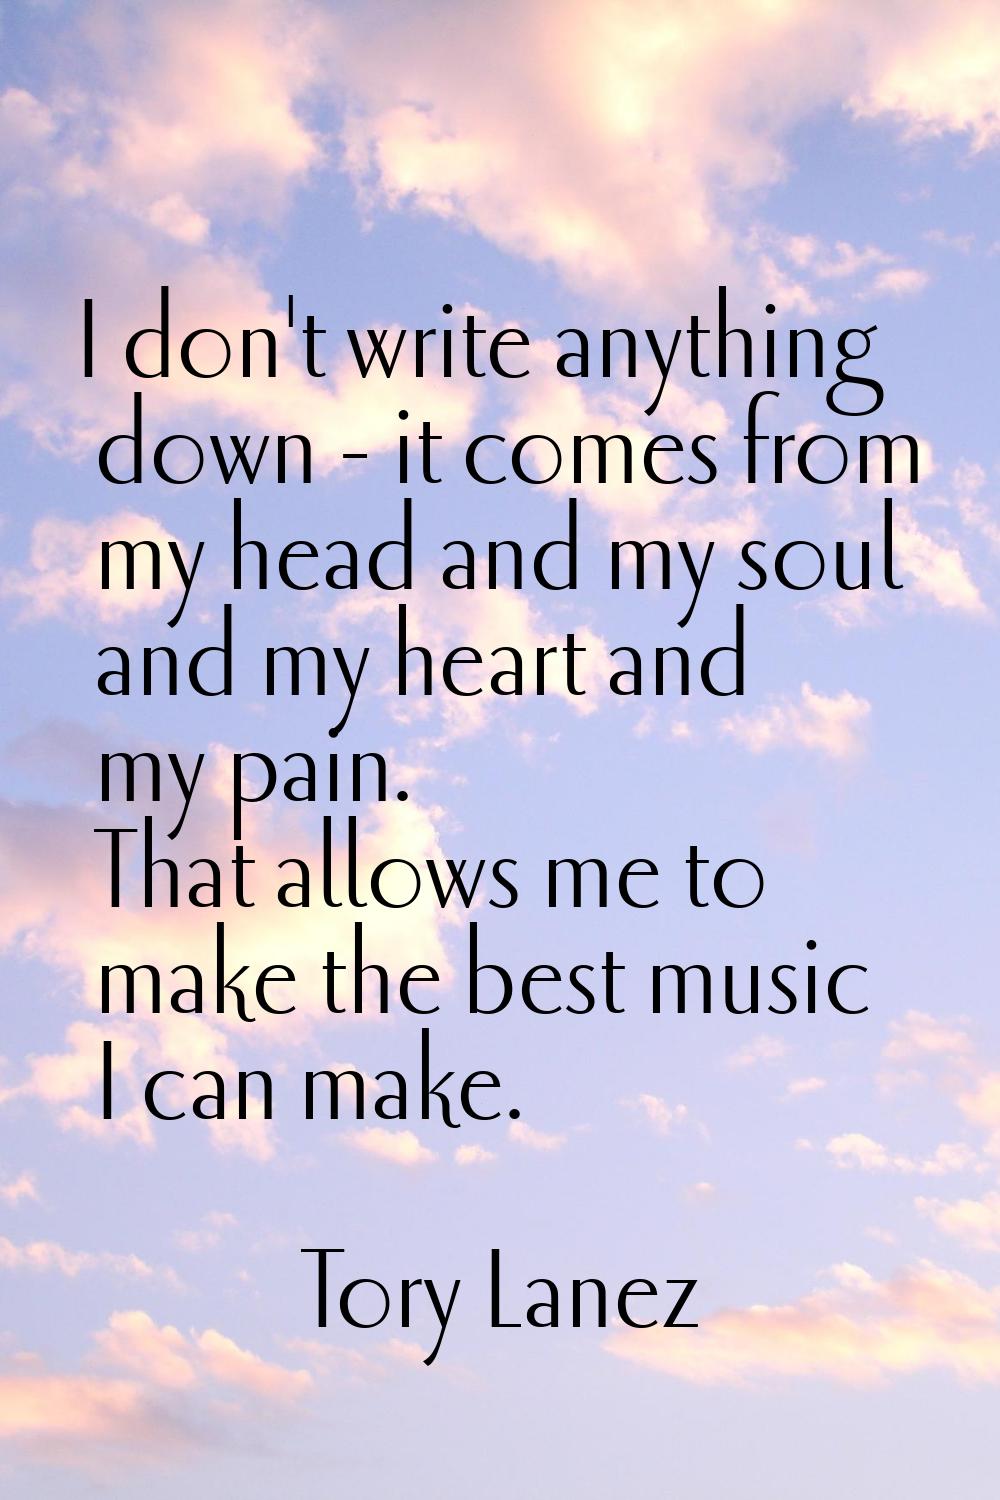 I don't write anything down - it comes from my head and my soul and my heart and my pain. That allo